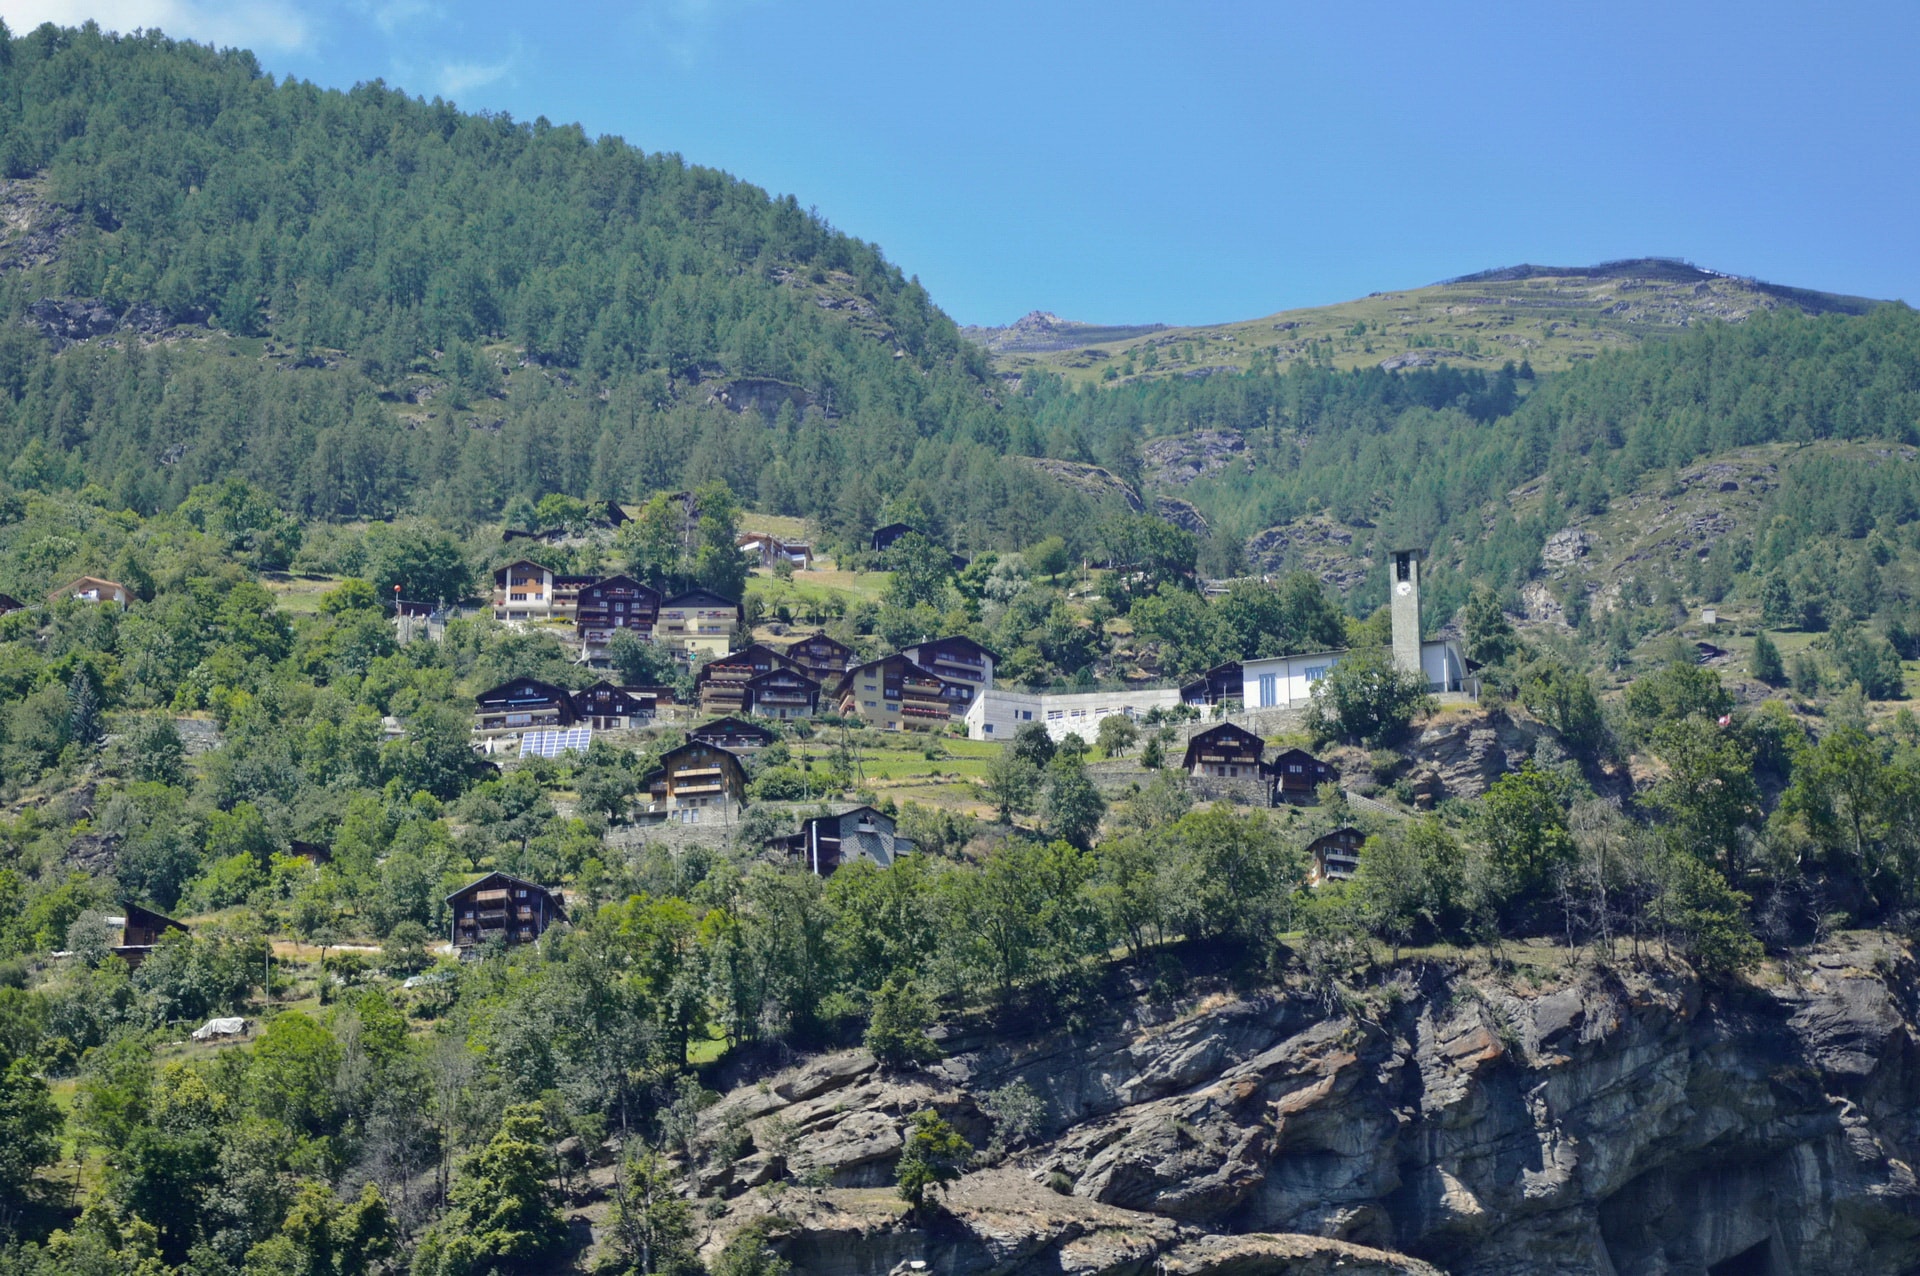 I saw this village on an edge of a cliff when approaching Zermatt